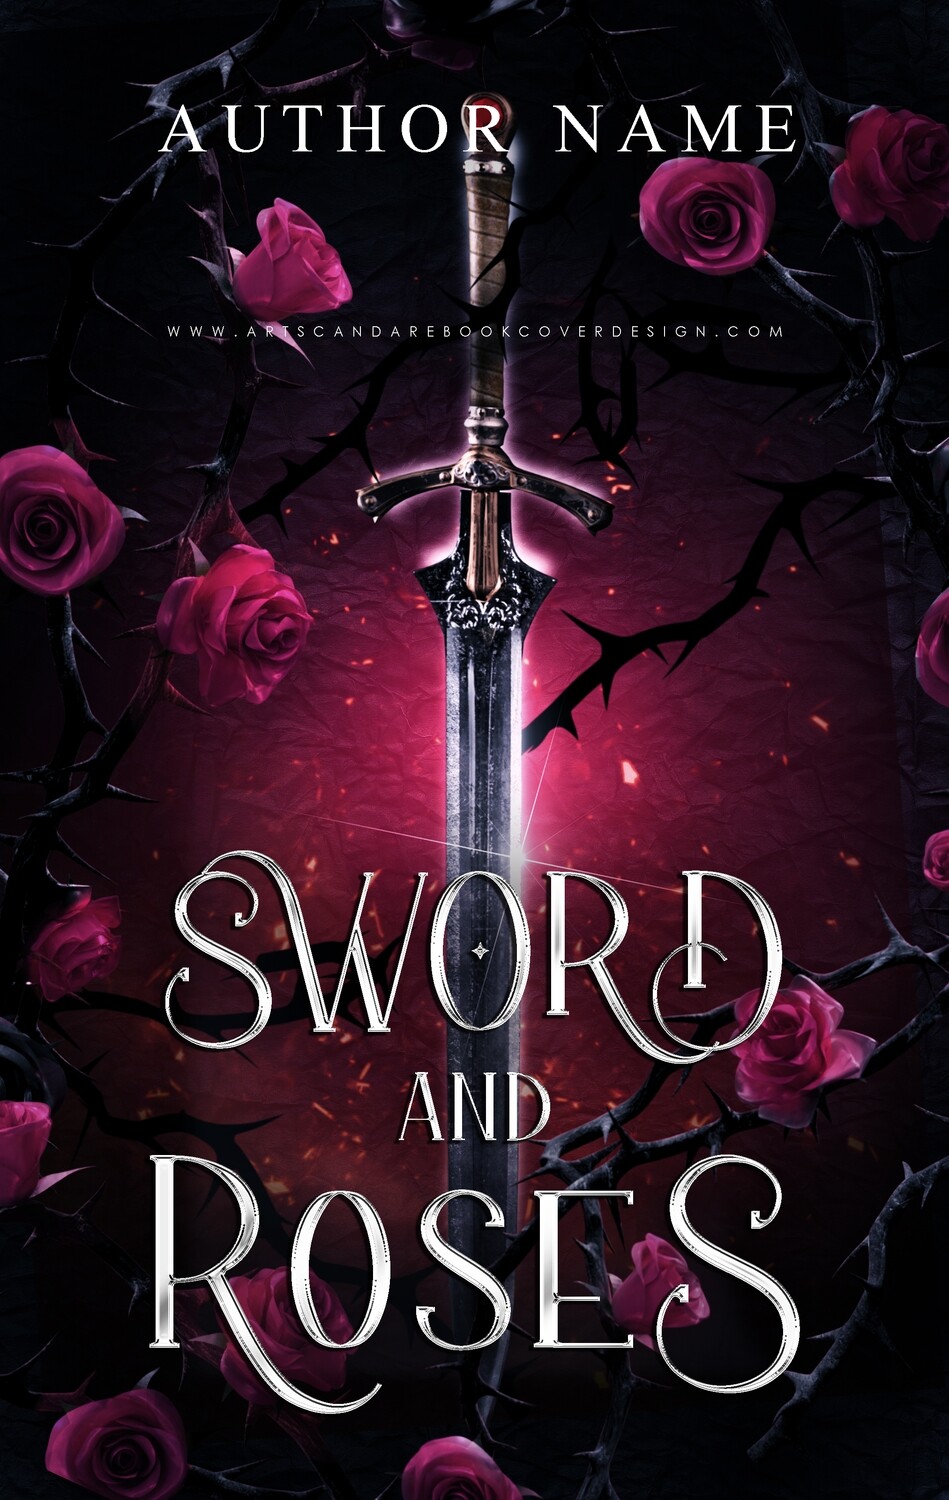 Ebook: Sword and Roses